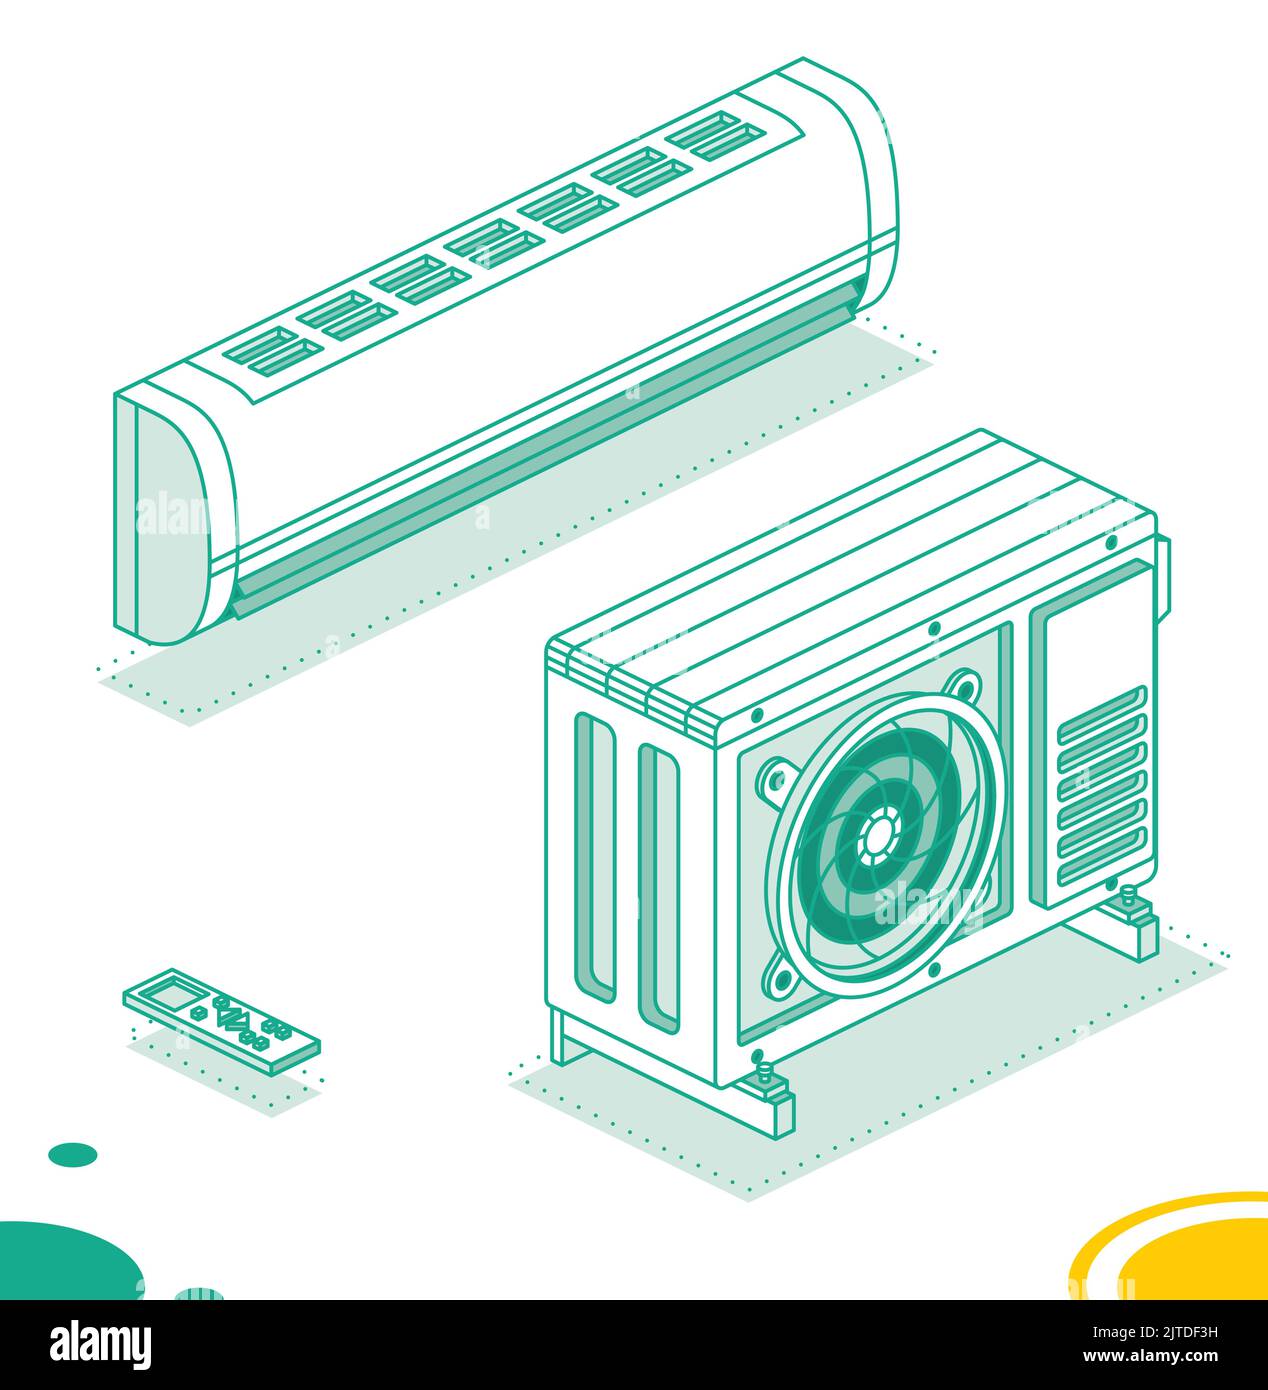 Air Conditioning System. Isometric Outline Concept. Outdoor Unit with Indoor and Remote Controller. Household Equipment for Cooling, Stock Vector